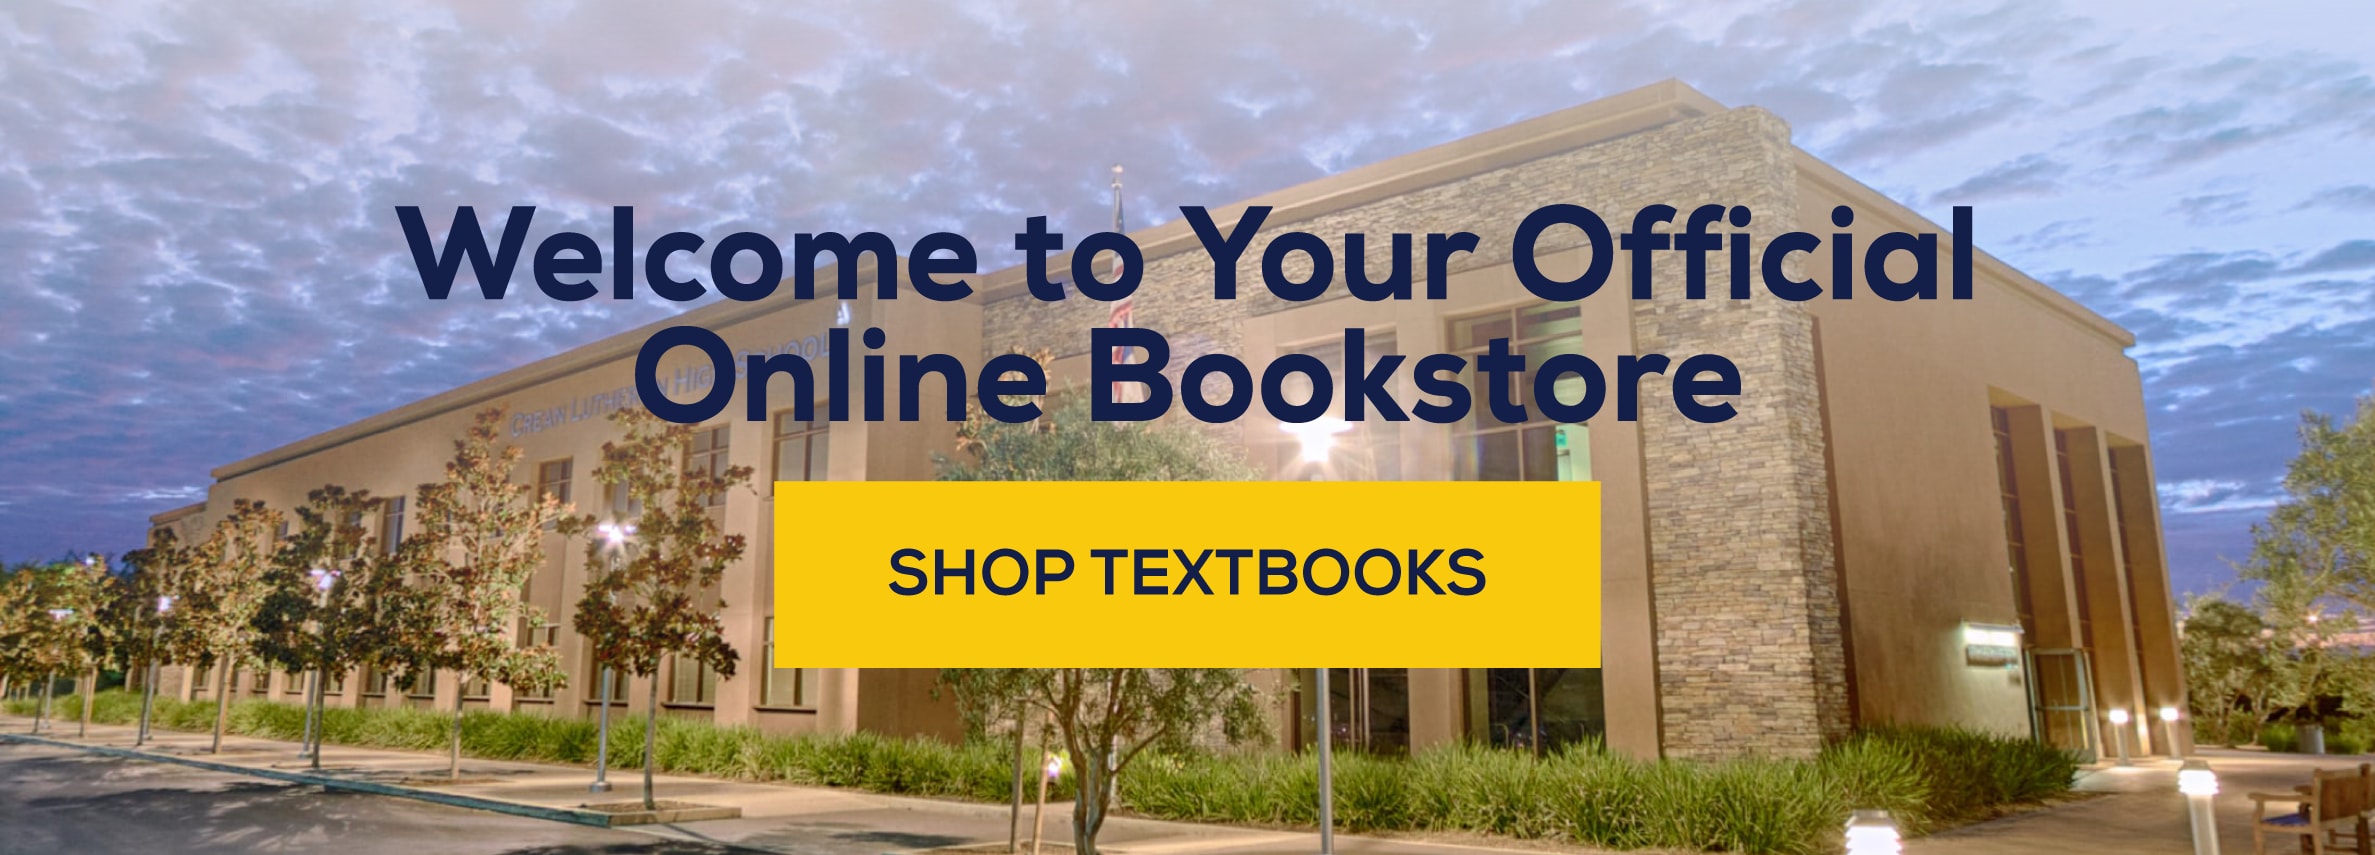 Welcome to your official online bookstore shop textbooks